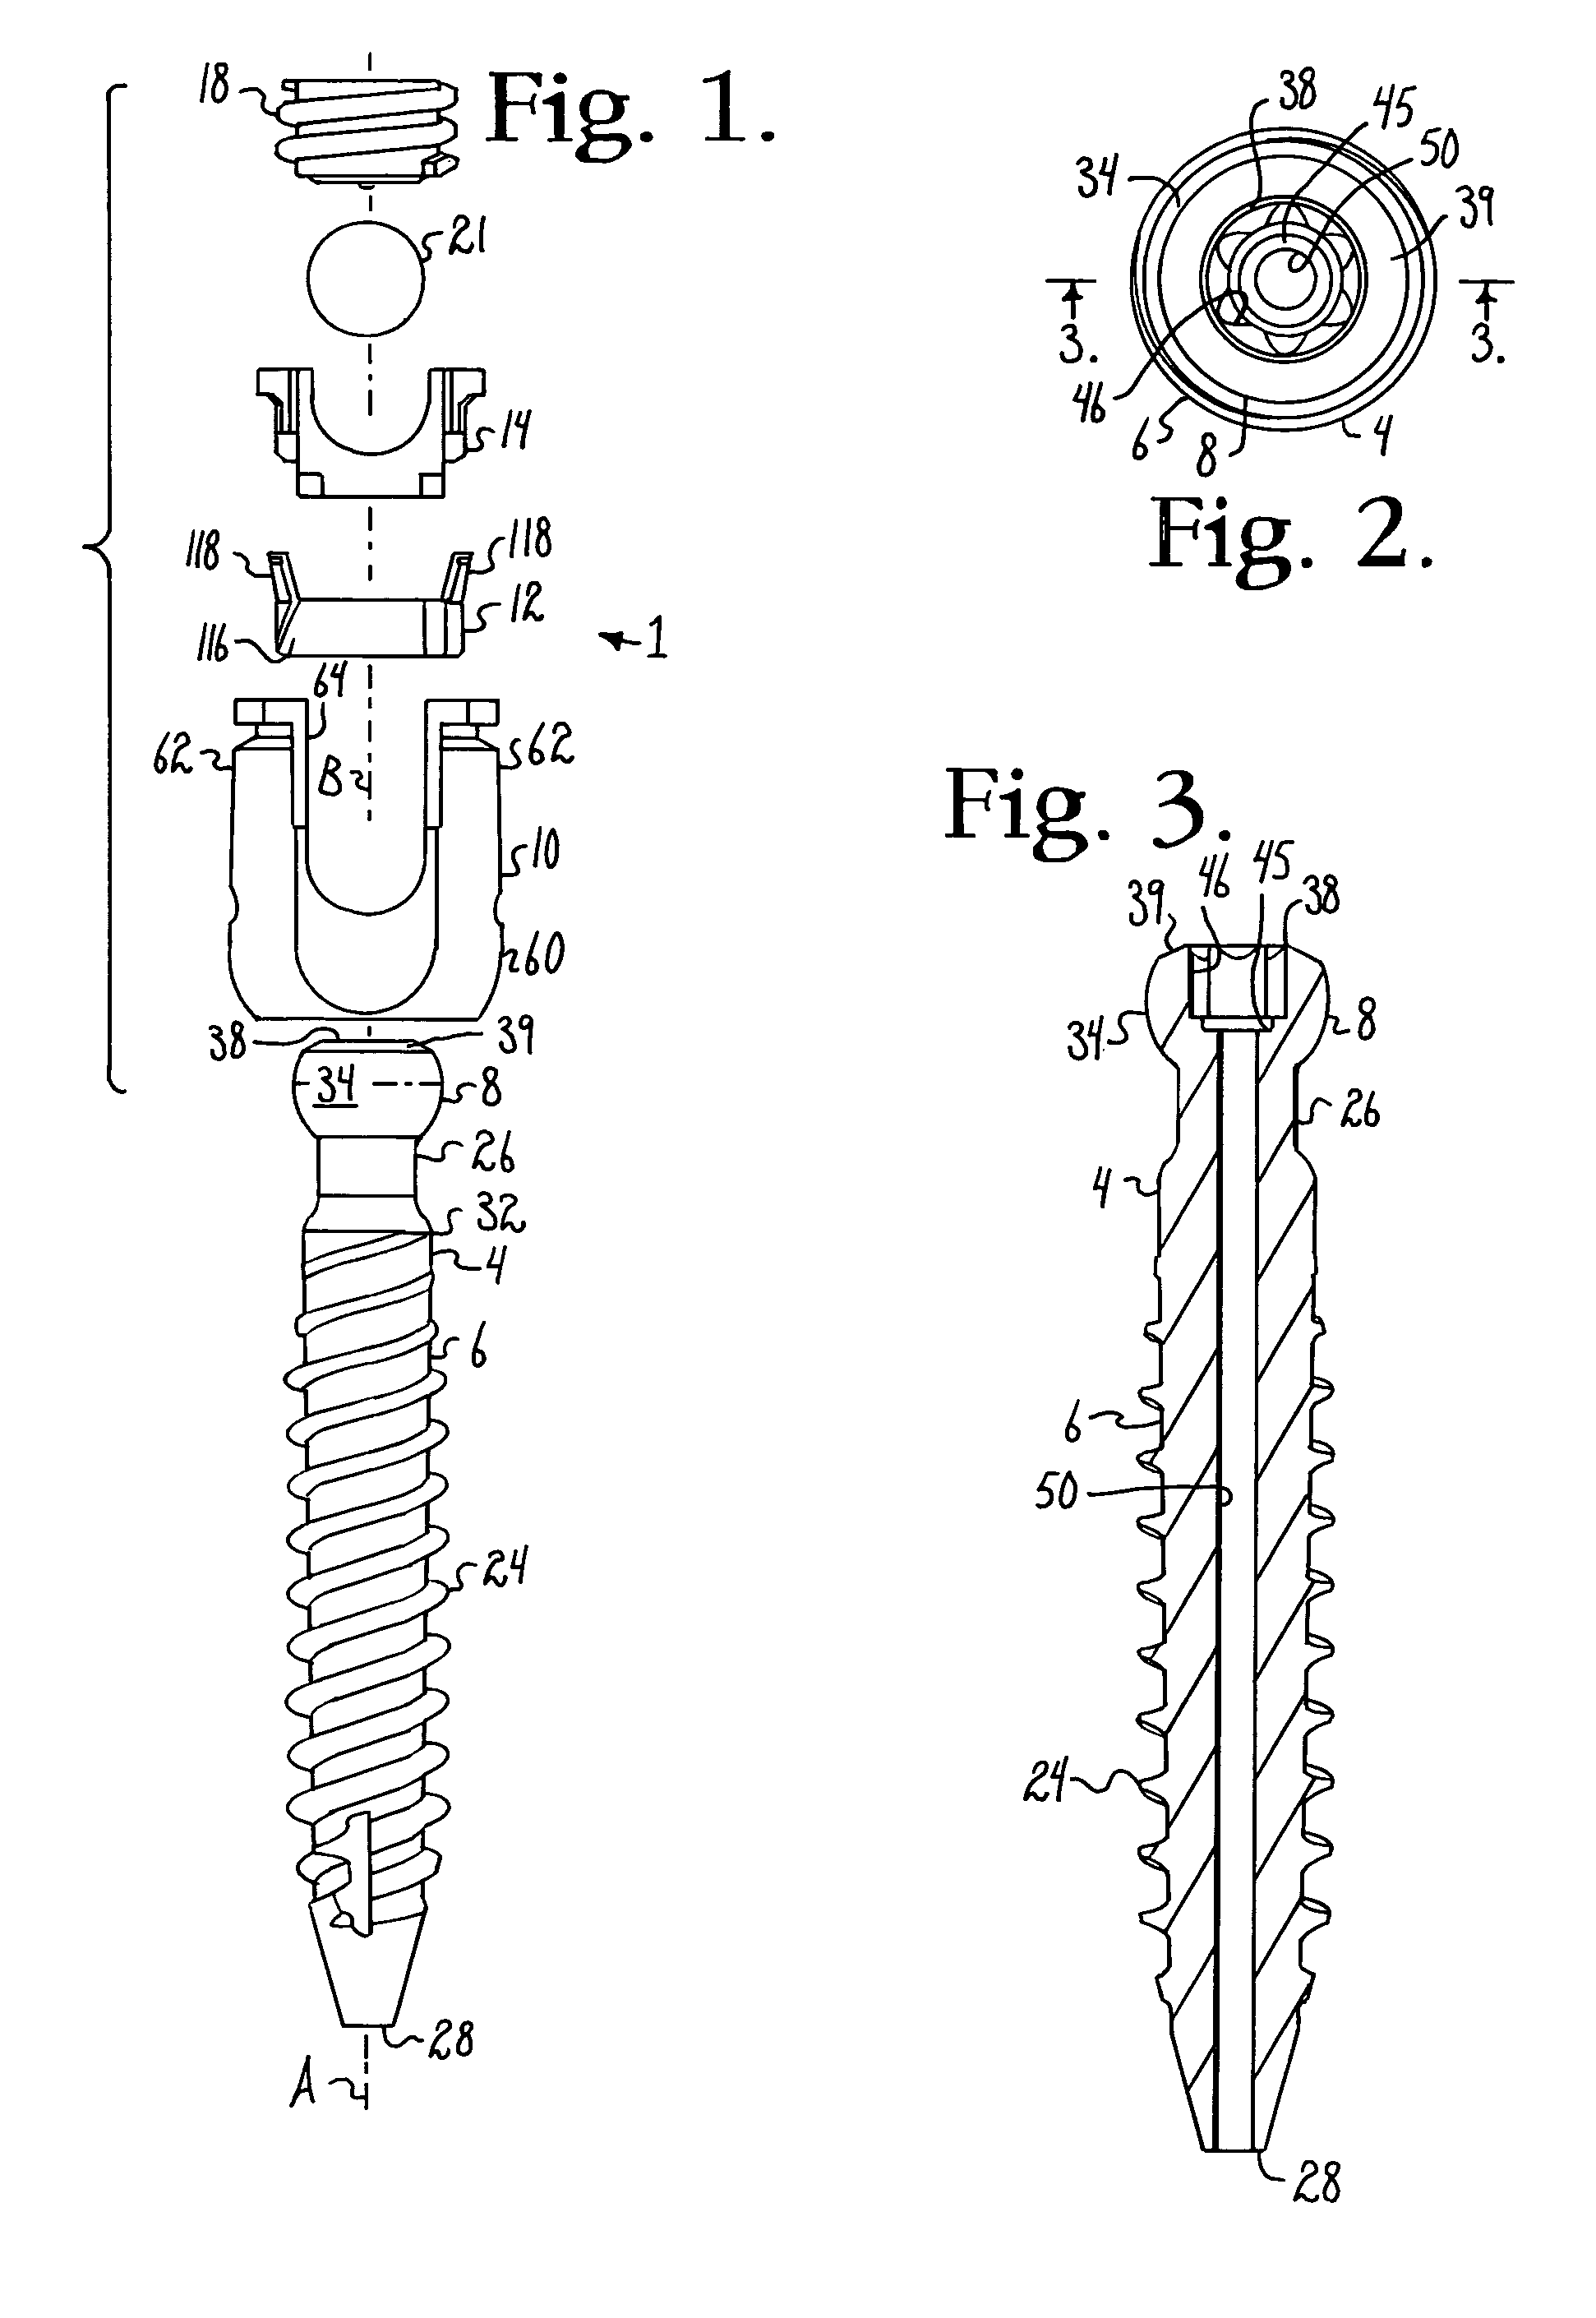 Polyaxial bone anchor with pop-on shank, friction fit retainer and winged insert